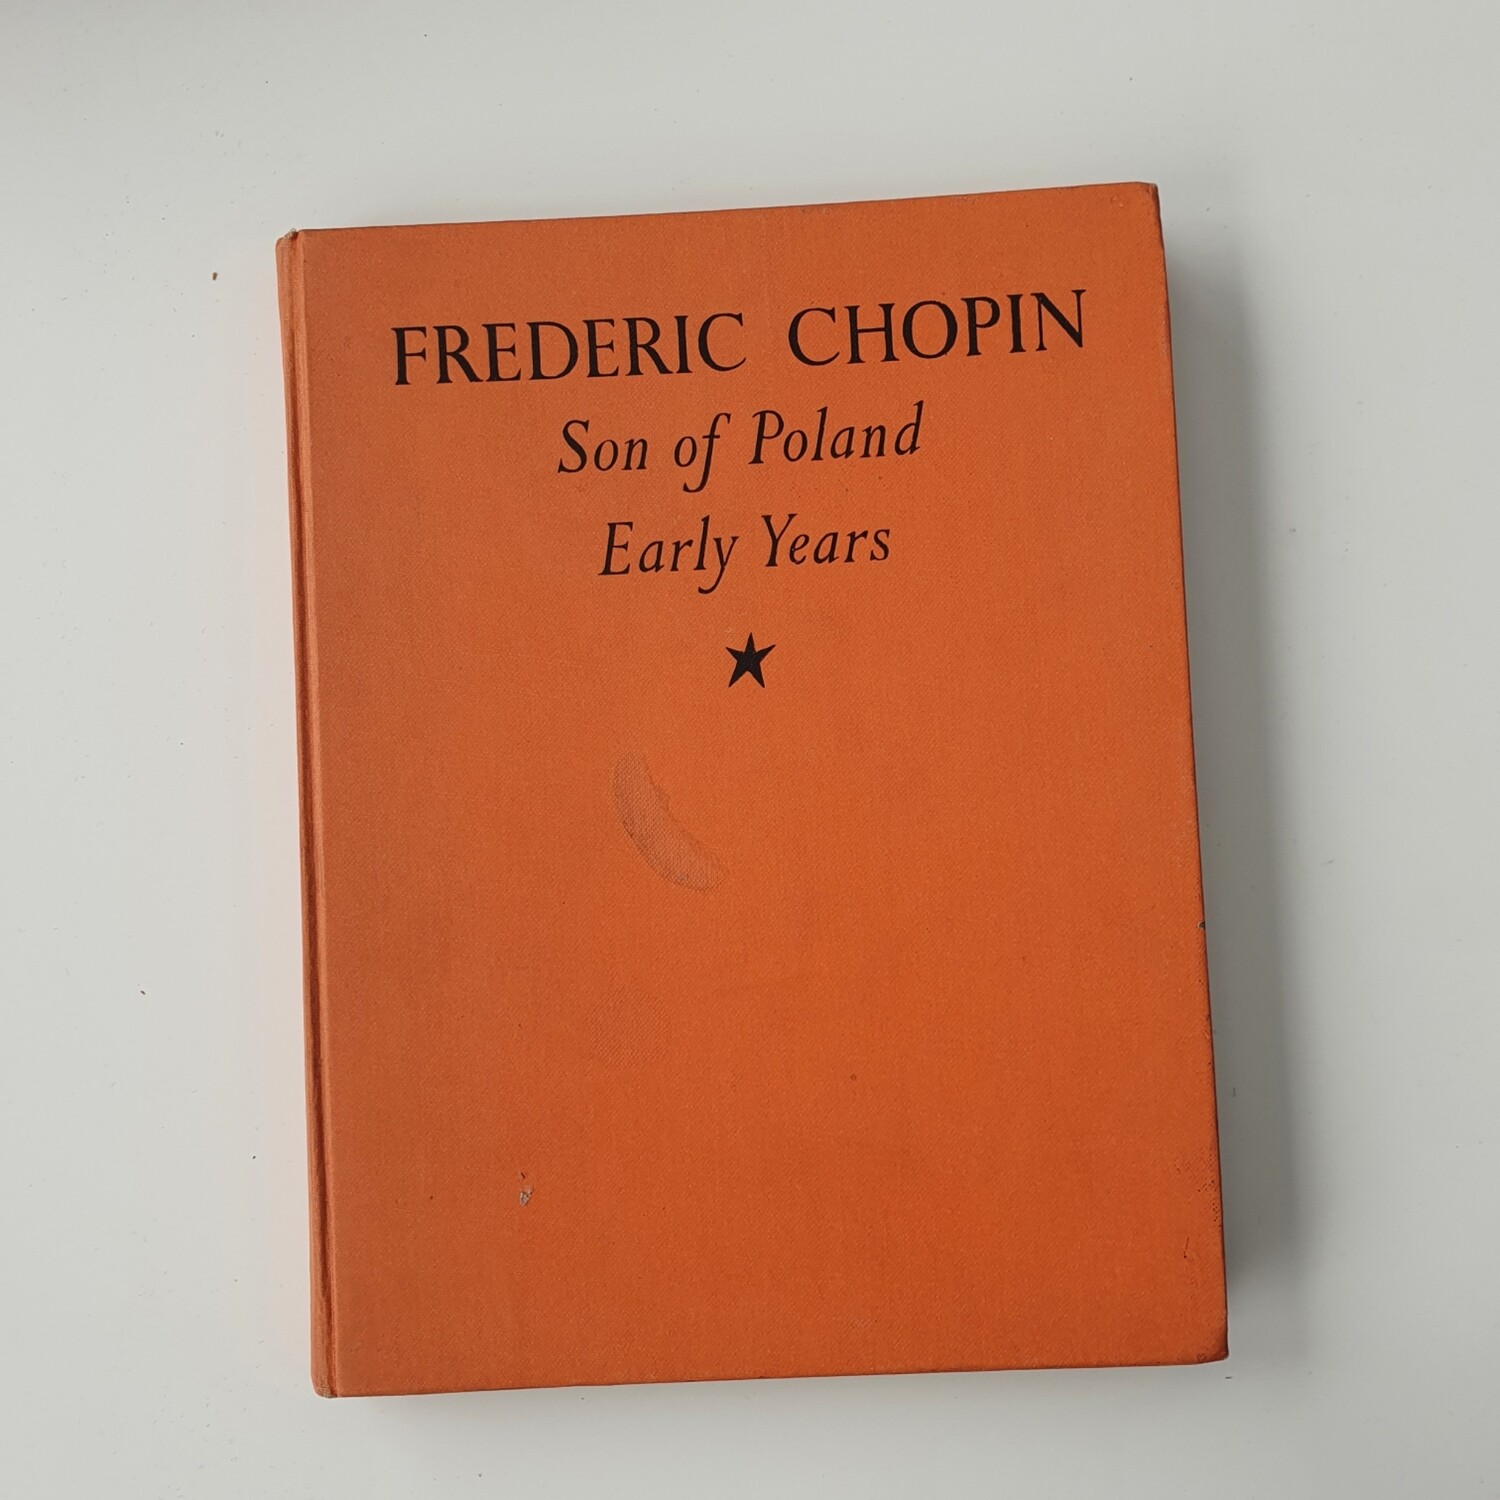 Frederic Chopin - Son of Poland  1949 - composer / music